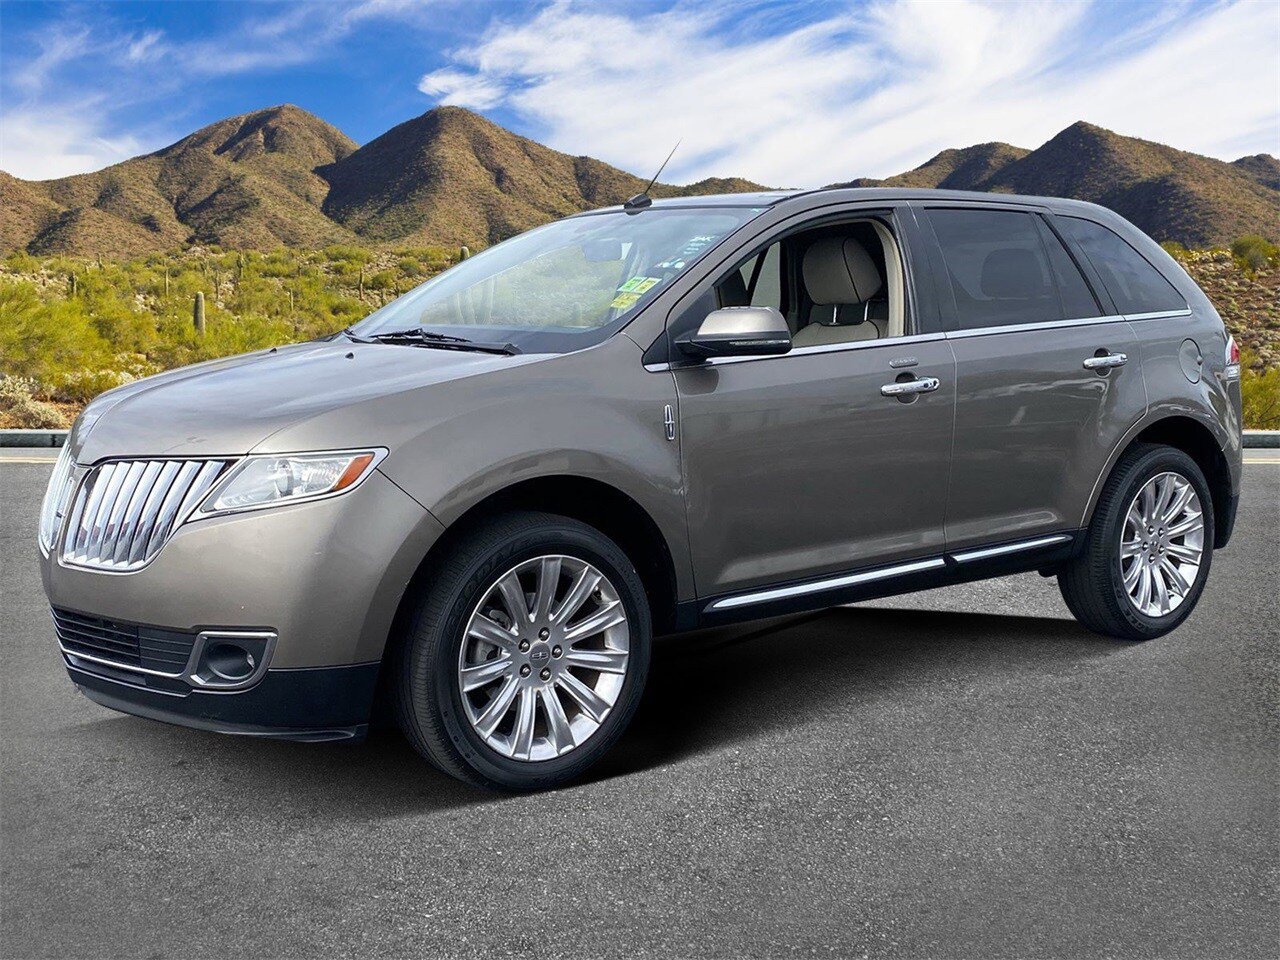 Used 2012 Lincoln MKX for Sale (Test Drive at Home) - Kelley Blue Book